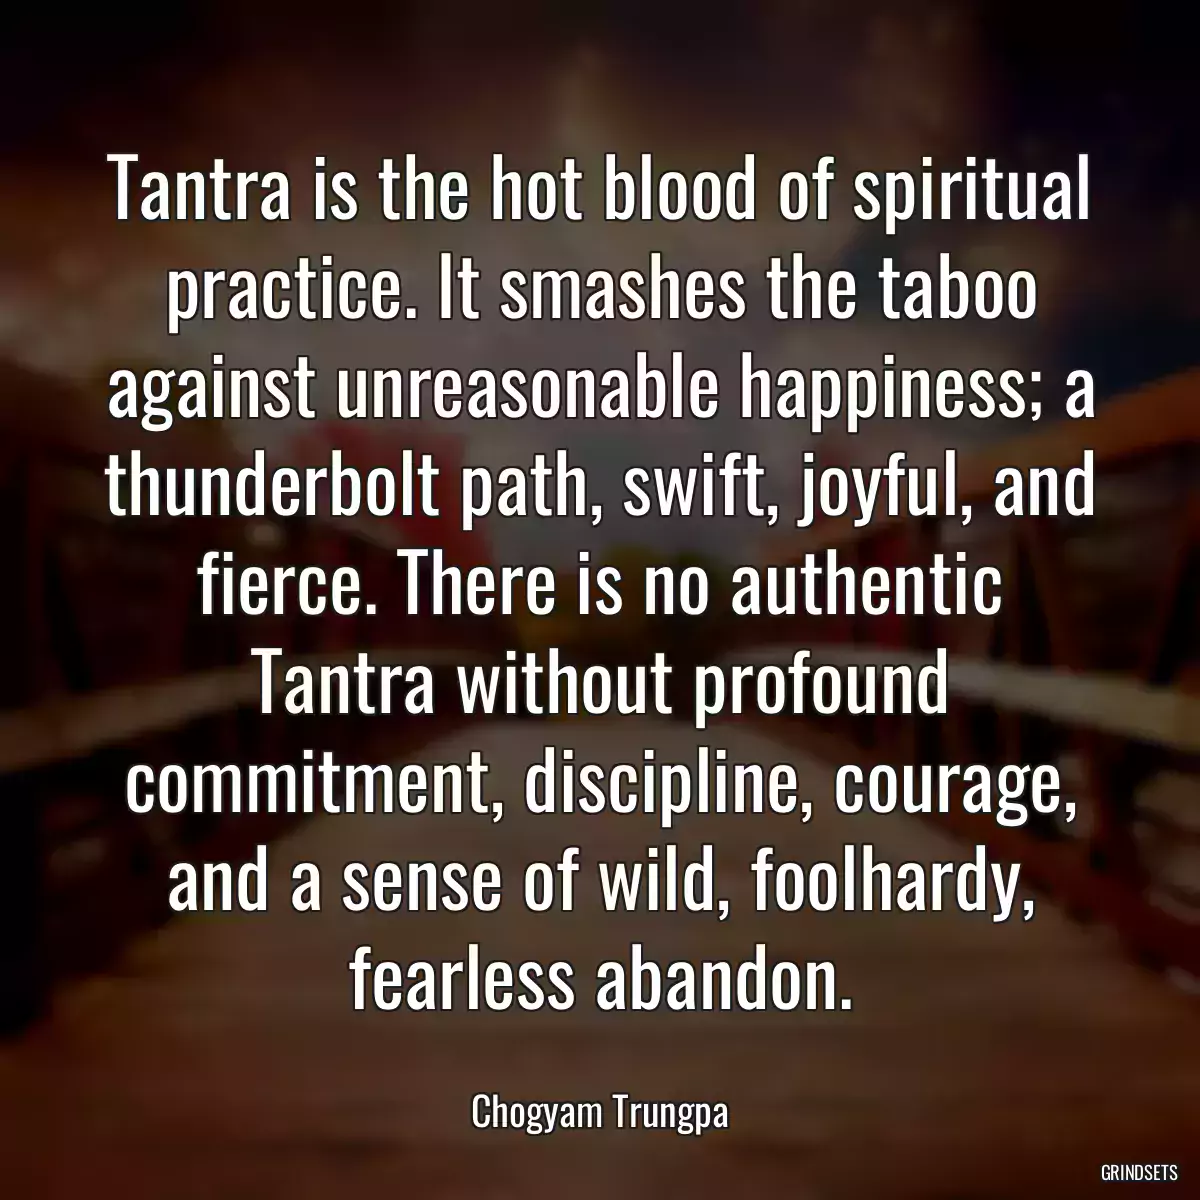 Tantra is the hot blood of spiritual practice. It smashes the taboo against unreasonable happiness; a thunderbolt path, swift, joyful, and fierce. There is no authentic Tantra without profound commitment, discipline, courage, and a sense of wild, foolhardy, fearless abandon.